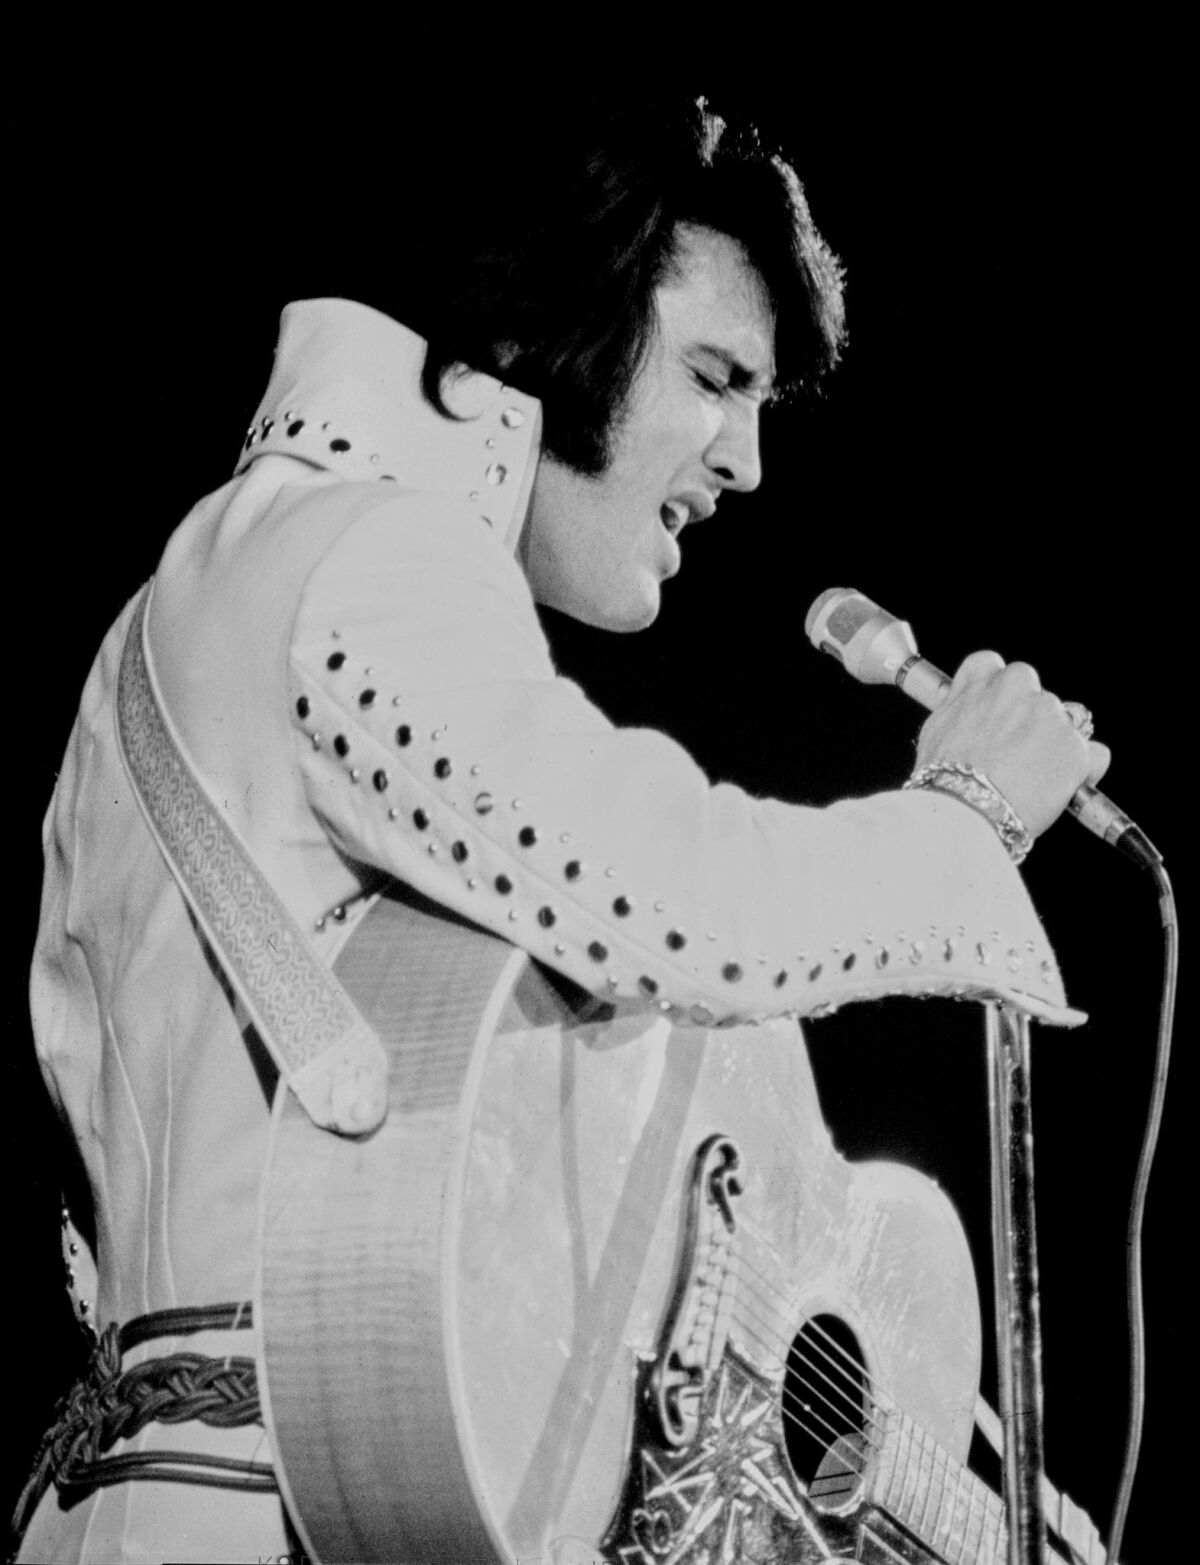 During the 1970s. Elvis was famous for his jewel-encrusted jumpsuits. He's seen here performing at the International on Aug. 17, 1971. (Jim Swift/Las Vegas News Bureau)